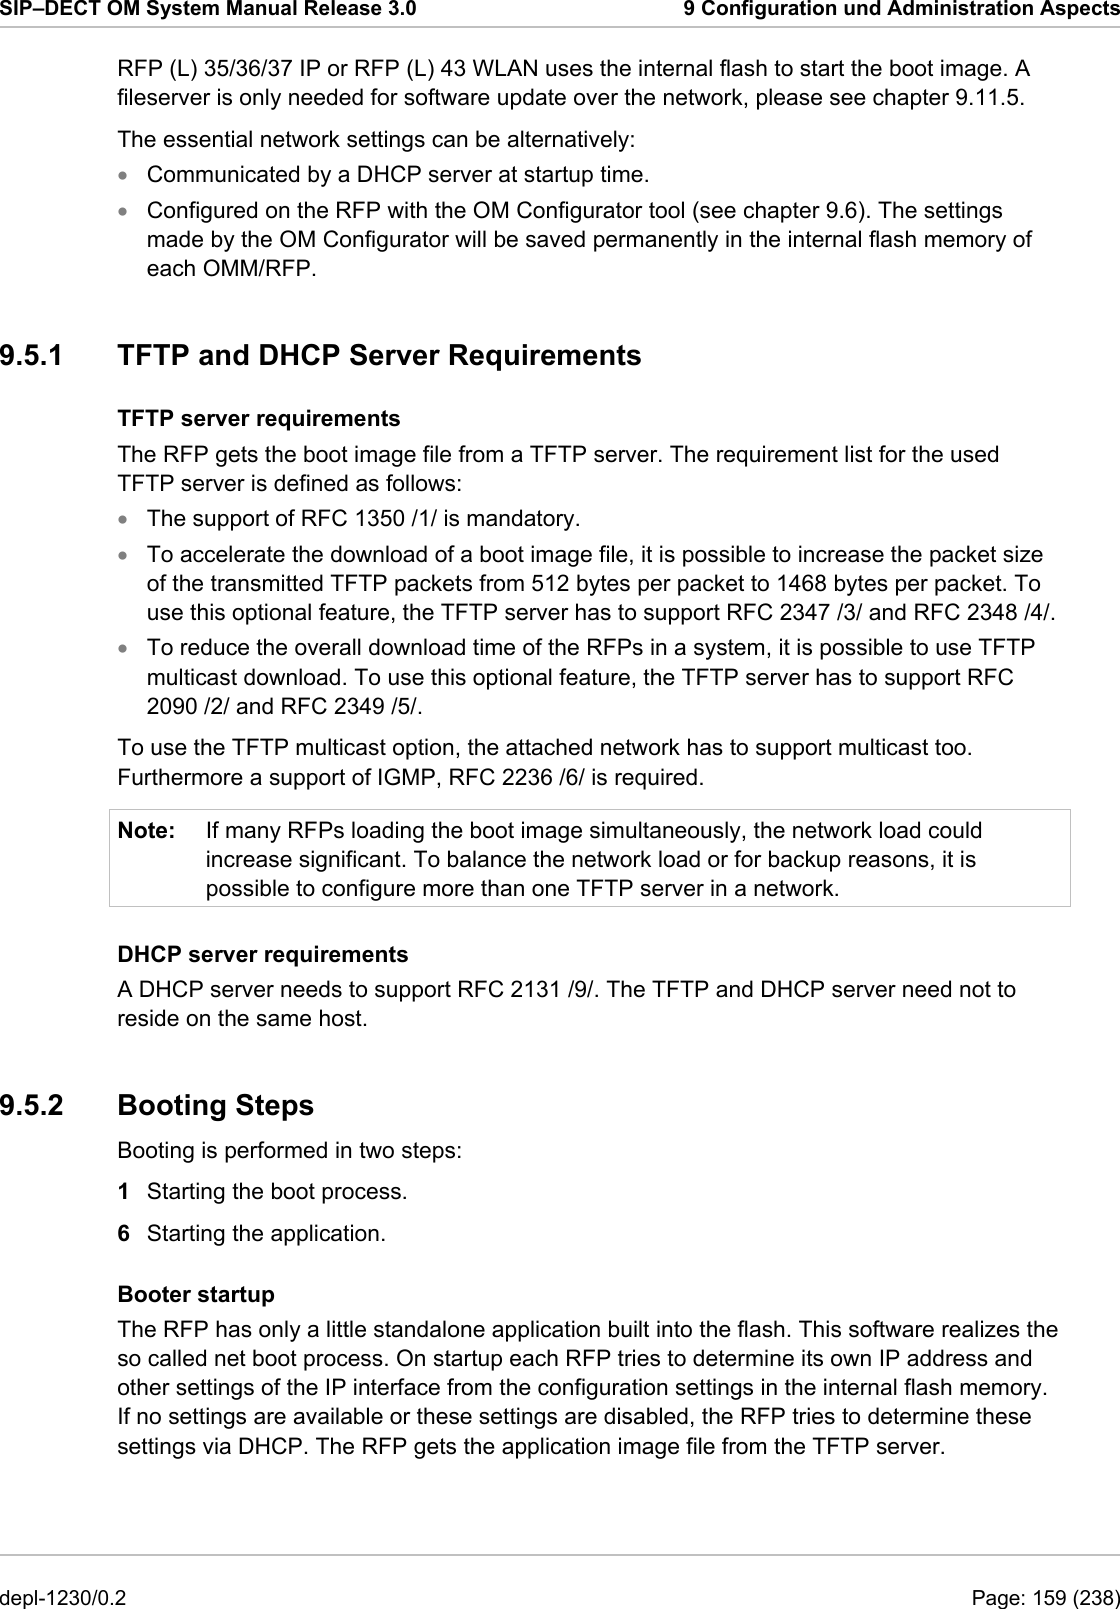 SIP–DECT OM System Manual Release 3.0  9 Configuration und Administration Aspects RFP (L) 35/36/37 IP or RFP (L) 43 WLAN uses the internal flash to start the boot image. A fileserver is only needed for software update over the network, please see chapter 9.11.5. The essential network settings can be alternatively: • • • • • Note: Communicated by a DHCP server at startup time. Configured on the RFP with the OM Configurator tool (see chapter 9.6). The settings made by the OM Configurator will be saved permanently in the internal flash memory of each OMM/RFP. 9.5.1  TFTP and DHCP Server Requirements TFTP server requirements The RFP gets the boot image file from a TFTP server. The requirement list for the used TFTP server is defined as follows: The support of RFC 1350 /1/ is mandatory. To accelerate the download of a boot image file, it is possible to increase the packet size of the transmitted TFTP packets from 512 bytes per packet to 1468 bytes per packet. To use this optional feature, the TFTP server has to support RFC 2347 /3/ and RFC 2348 /4/. To reduce the overall download time of the RFPs in a system, it is possible to use TFTP multicast download. To use this optional feature, the TFTP server has to support RFC 2090 /2/ and RFC 2349 /5/. To use the TFTP multicast option, the attached network has to support multicast too. Furthermore a support of IGMP, RFC 2236 /6/ is required. If many RFPs loading the boot image simultaneously, the network load could increase significant. To balance the network load or for backup reasons, it is possible to configure more than one TFTP server in a network. DHCP server requirements A DHCP server needs to support RFC 2131 /9/. The TFTP and DHCP server need not to reside on the same host. 9.5.2 Booting Steps Booting is performed in two steps: 1  Starting the boot process. 6  Starting the application. Booter startup The RFP has only a little standalone application built into the flash. This software realizes the so called net boot process. On startup each RFP tries to determine its own IP address and other settings of the IP interface from the configuration settings in the internal flash memory. If no settings are available or these settings are disabled, the RFP tries to determine these settings via DHCP. The RFP gets the application image file from the TFTP server. depl-1230/0.2  Page: 159 (238) 